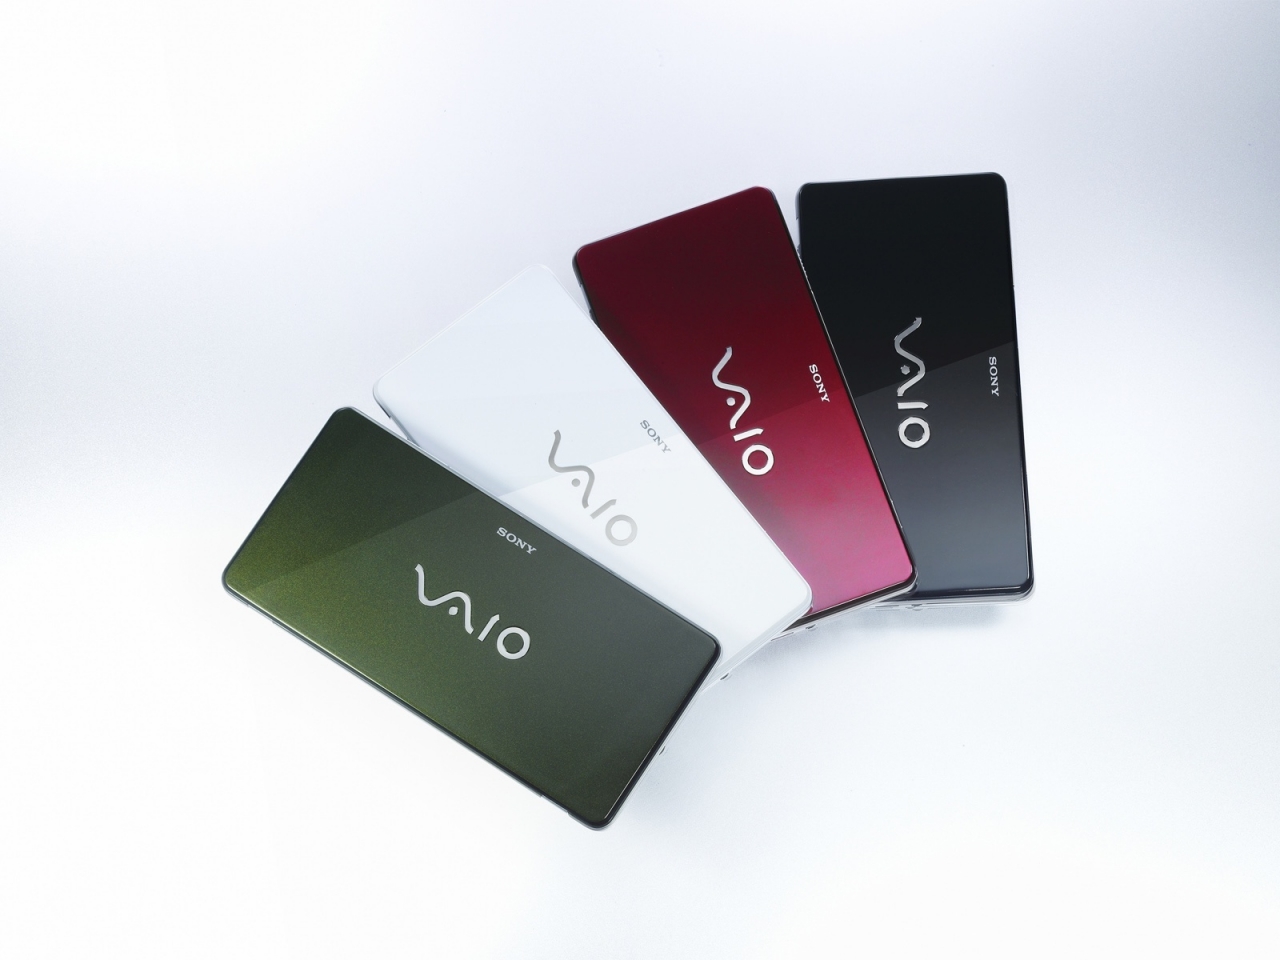 Sony Vaio 4 great colors for 1280 x 960 resolution